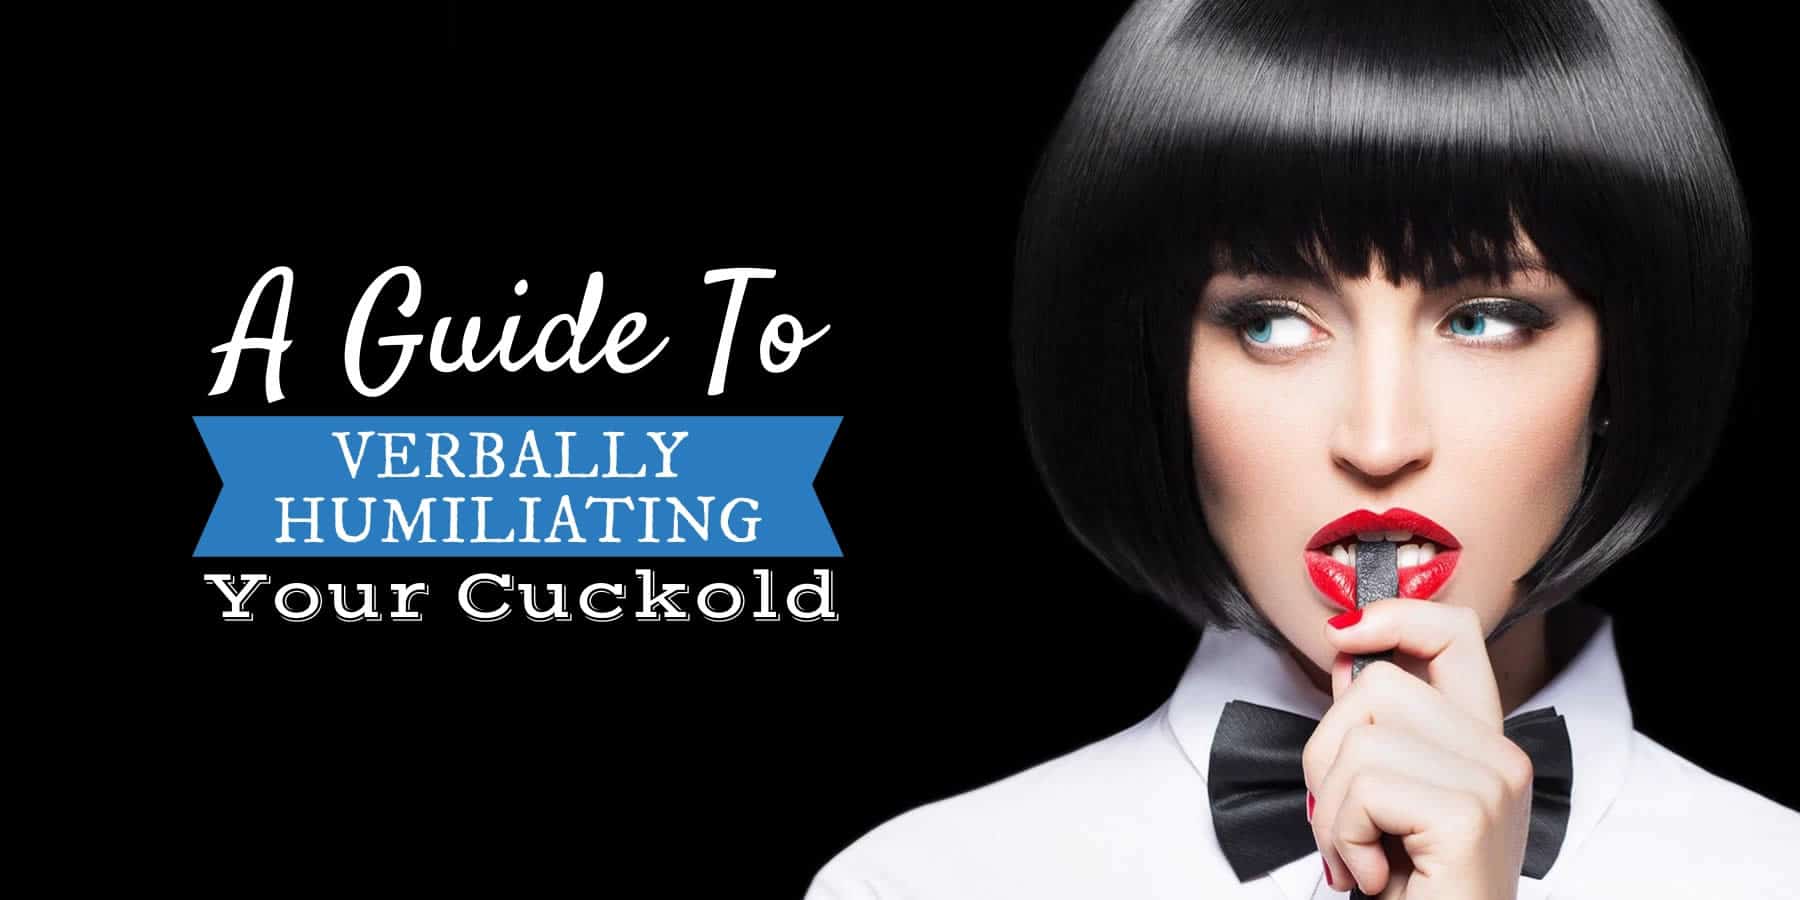 A Guide to Verbally Humiliating Your Cuckold (with Examples) photo pic